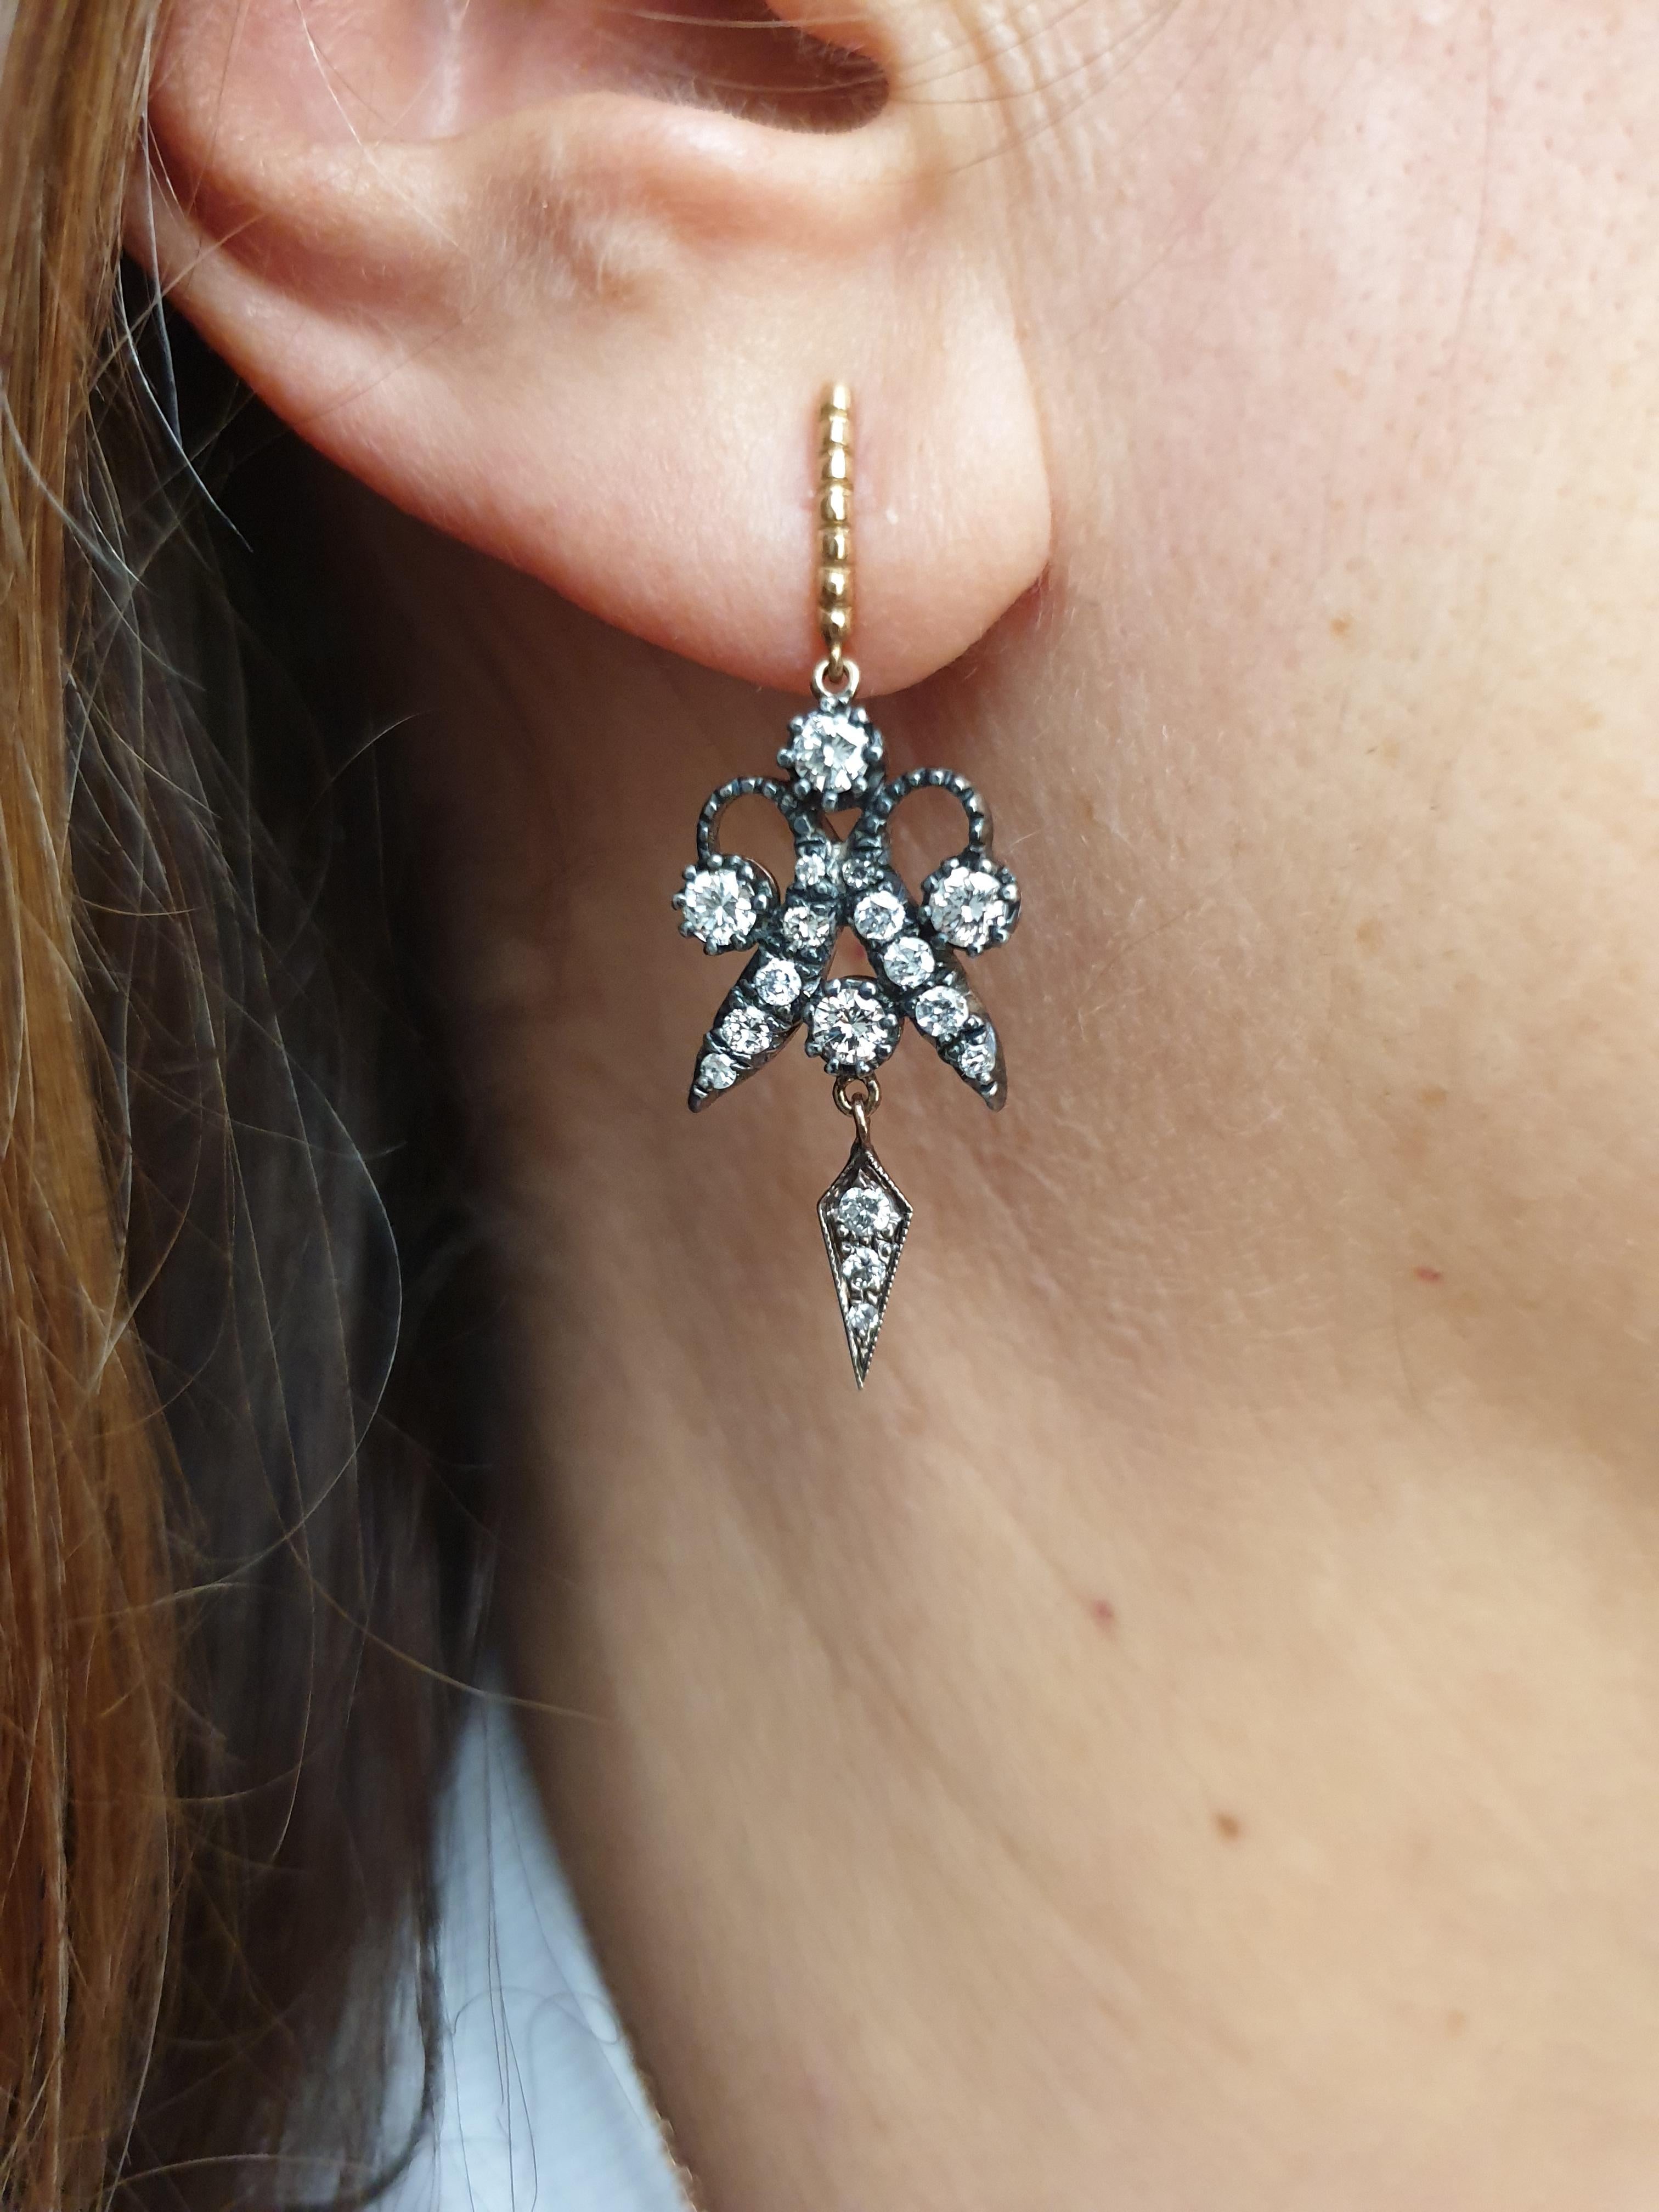 Handmade silver topped gold earrings with brilliant cut diamonds, antique style.
